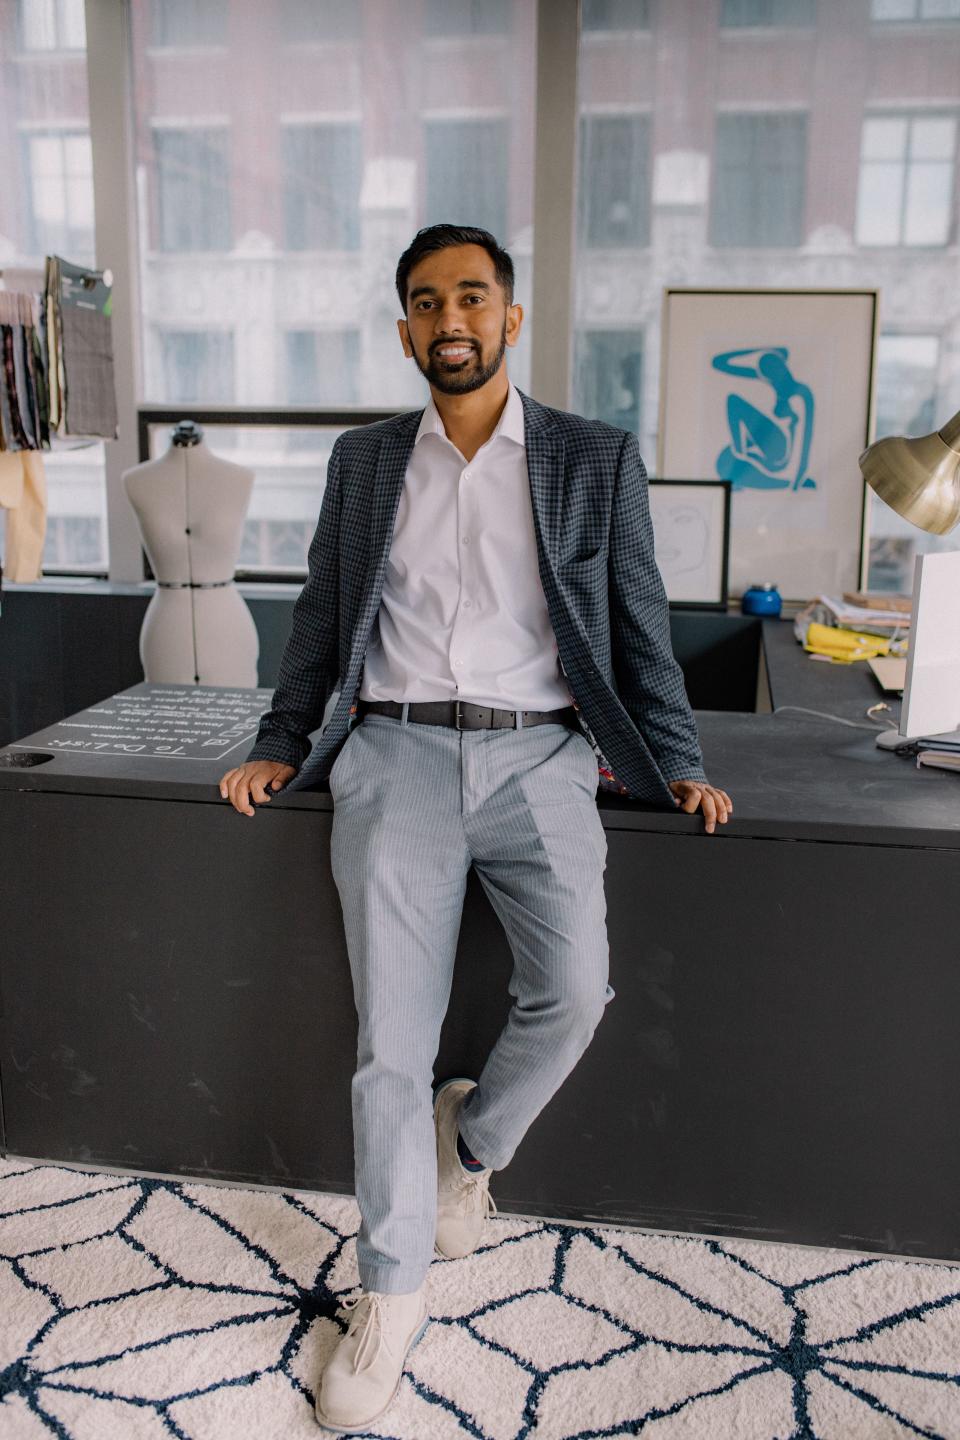 From loom to the final product, Iowa-based CEO Russel Karim is advocating for a more transparent and sustainable clothing manufacturing process through Dhakai, a marketplace that helps connect clothing brands to factories.